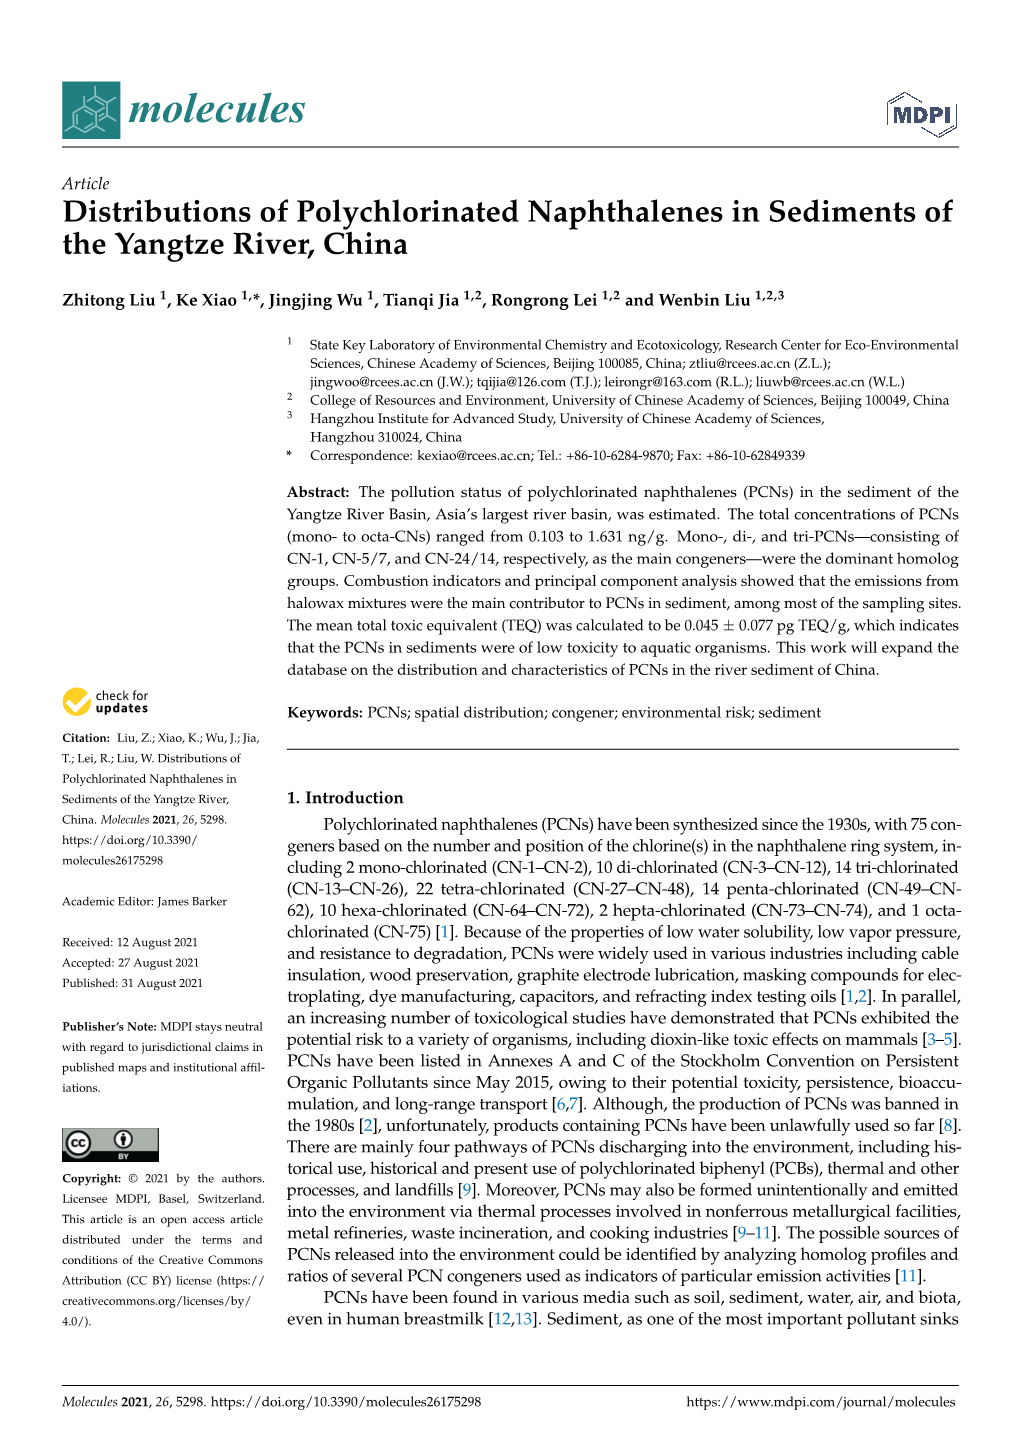 Article Distributions of Polychlorinated Naphthalenes in Sediments of the Yangtze River, China